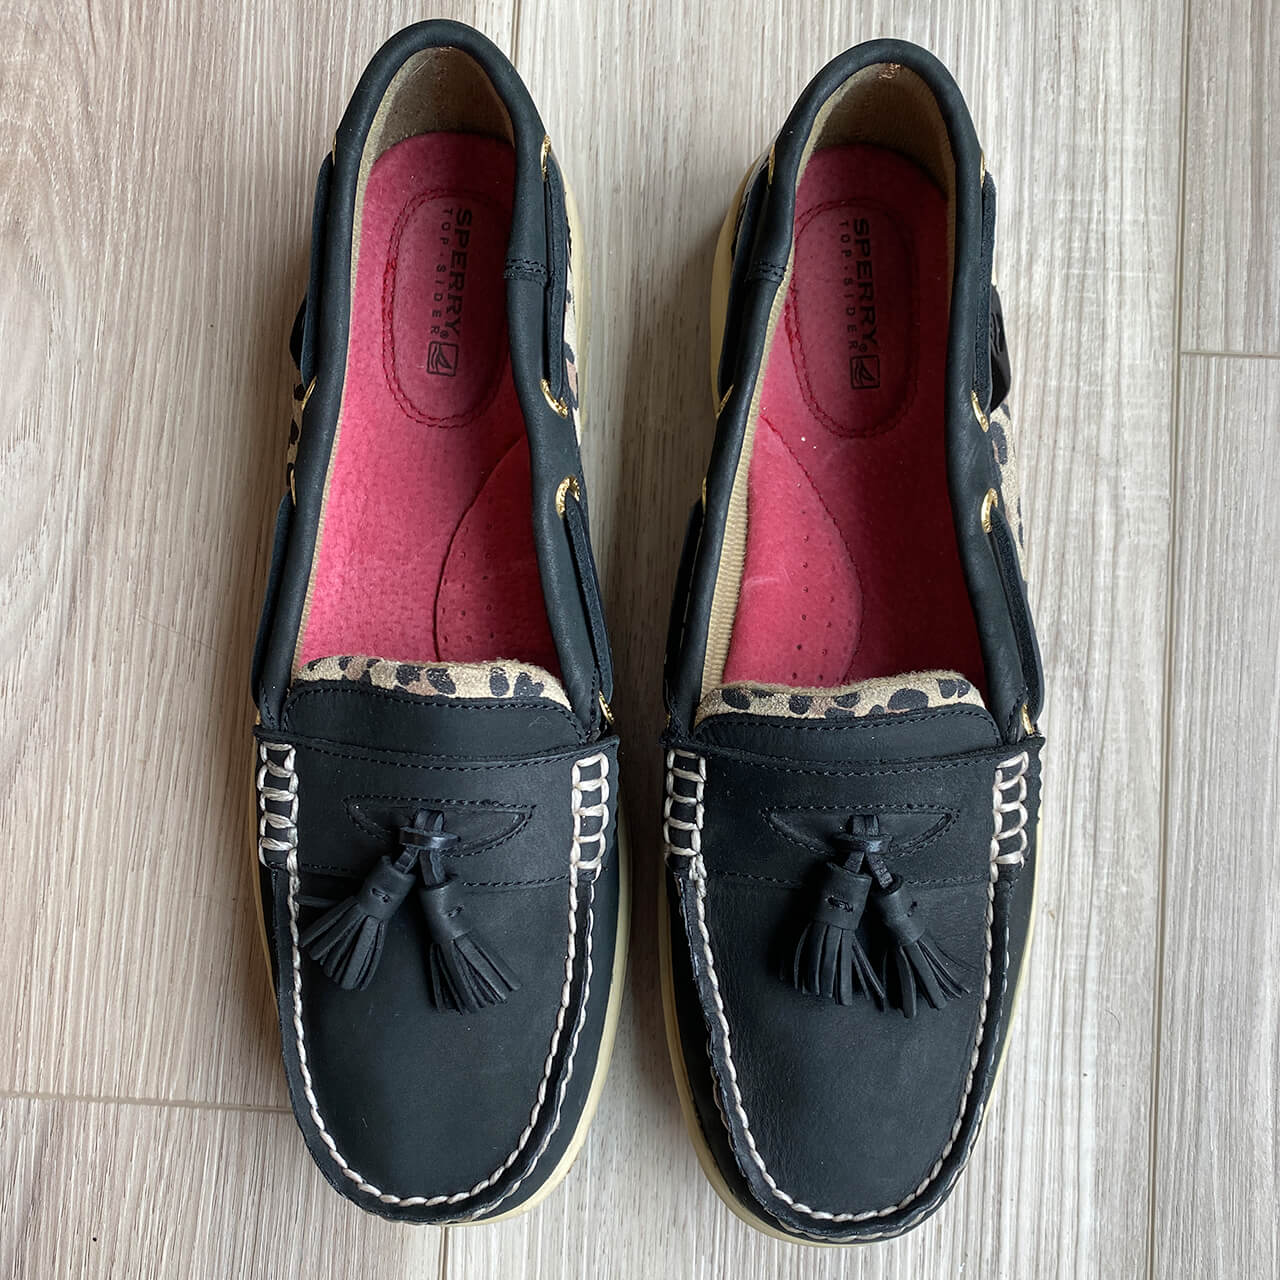 Sperry-Top-Sider-Tassel-Fish-Leopard-Boat-Shoes